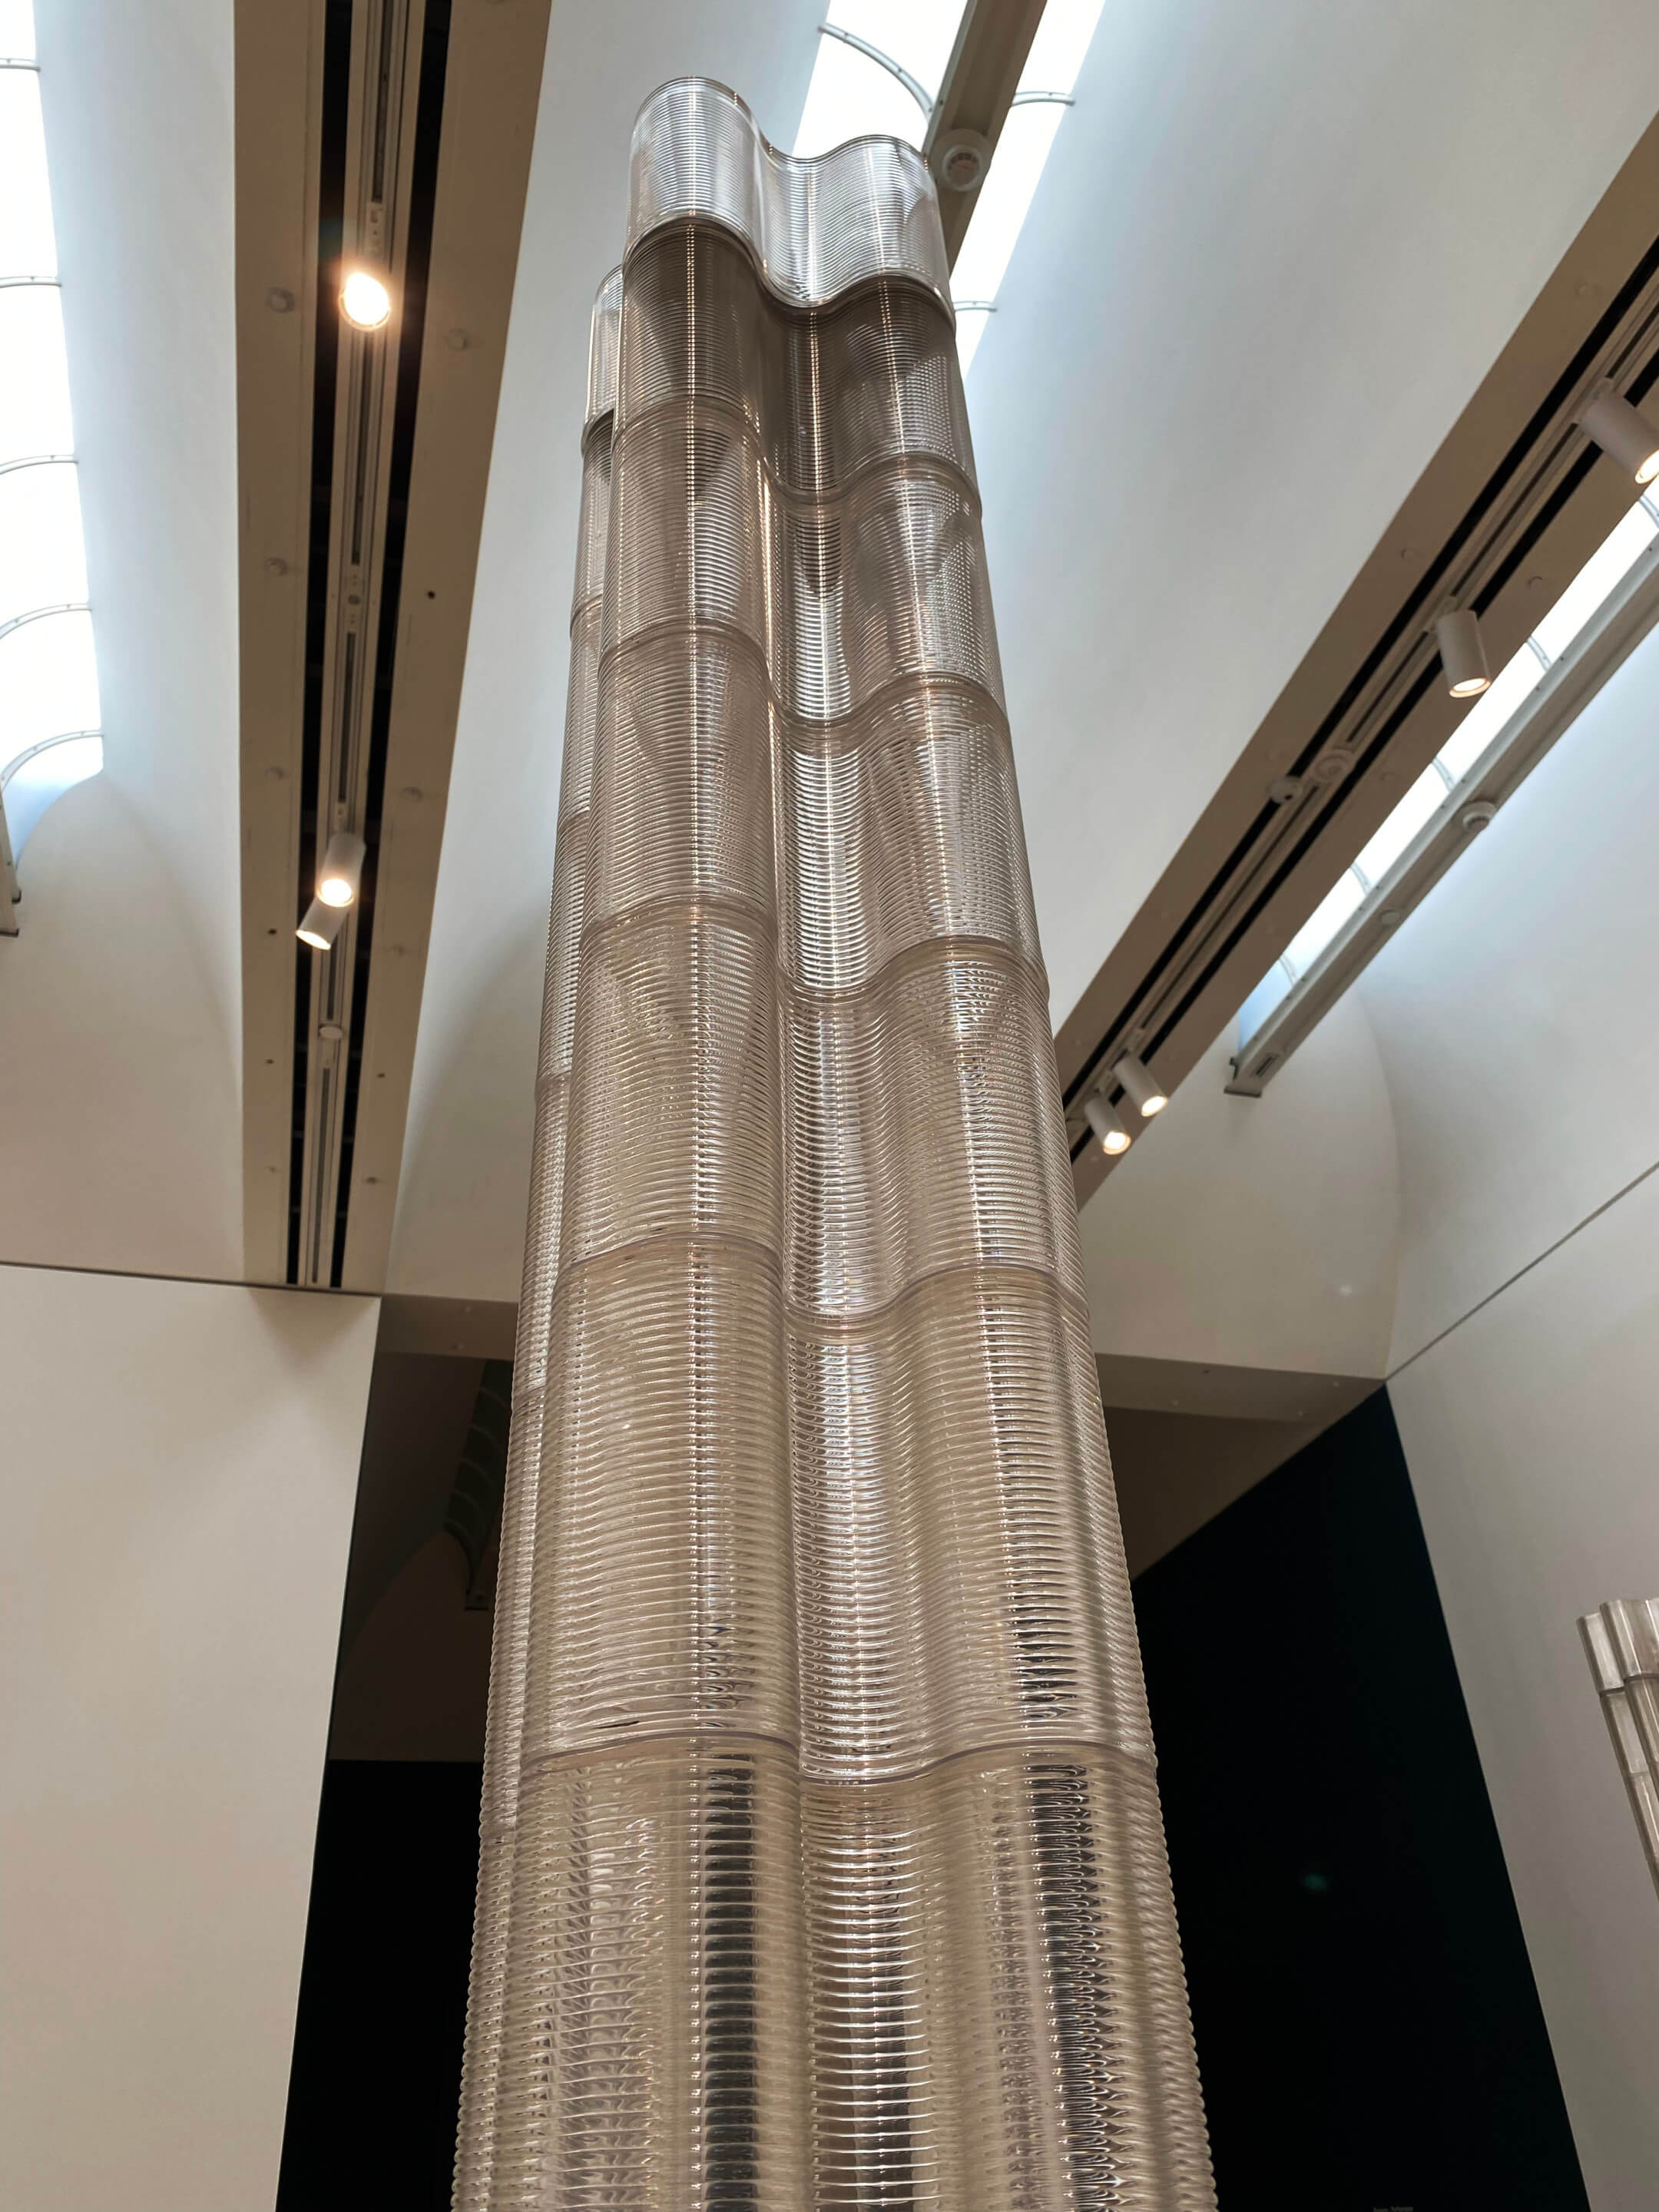 A 3D-printed glass tower